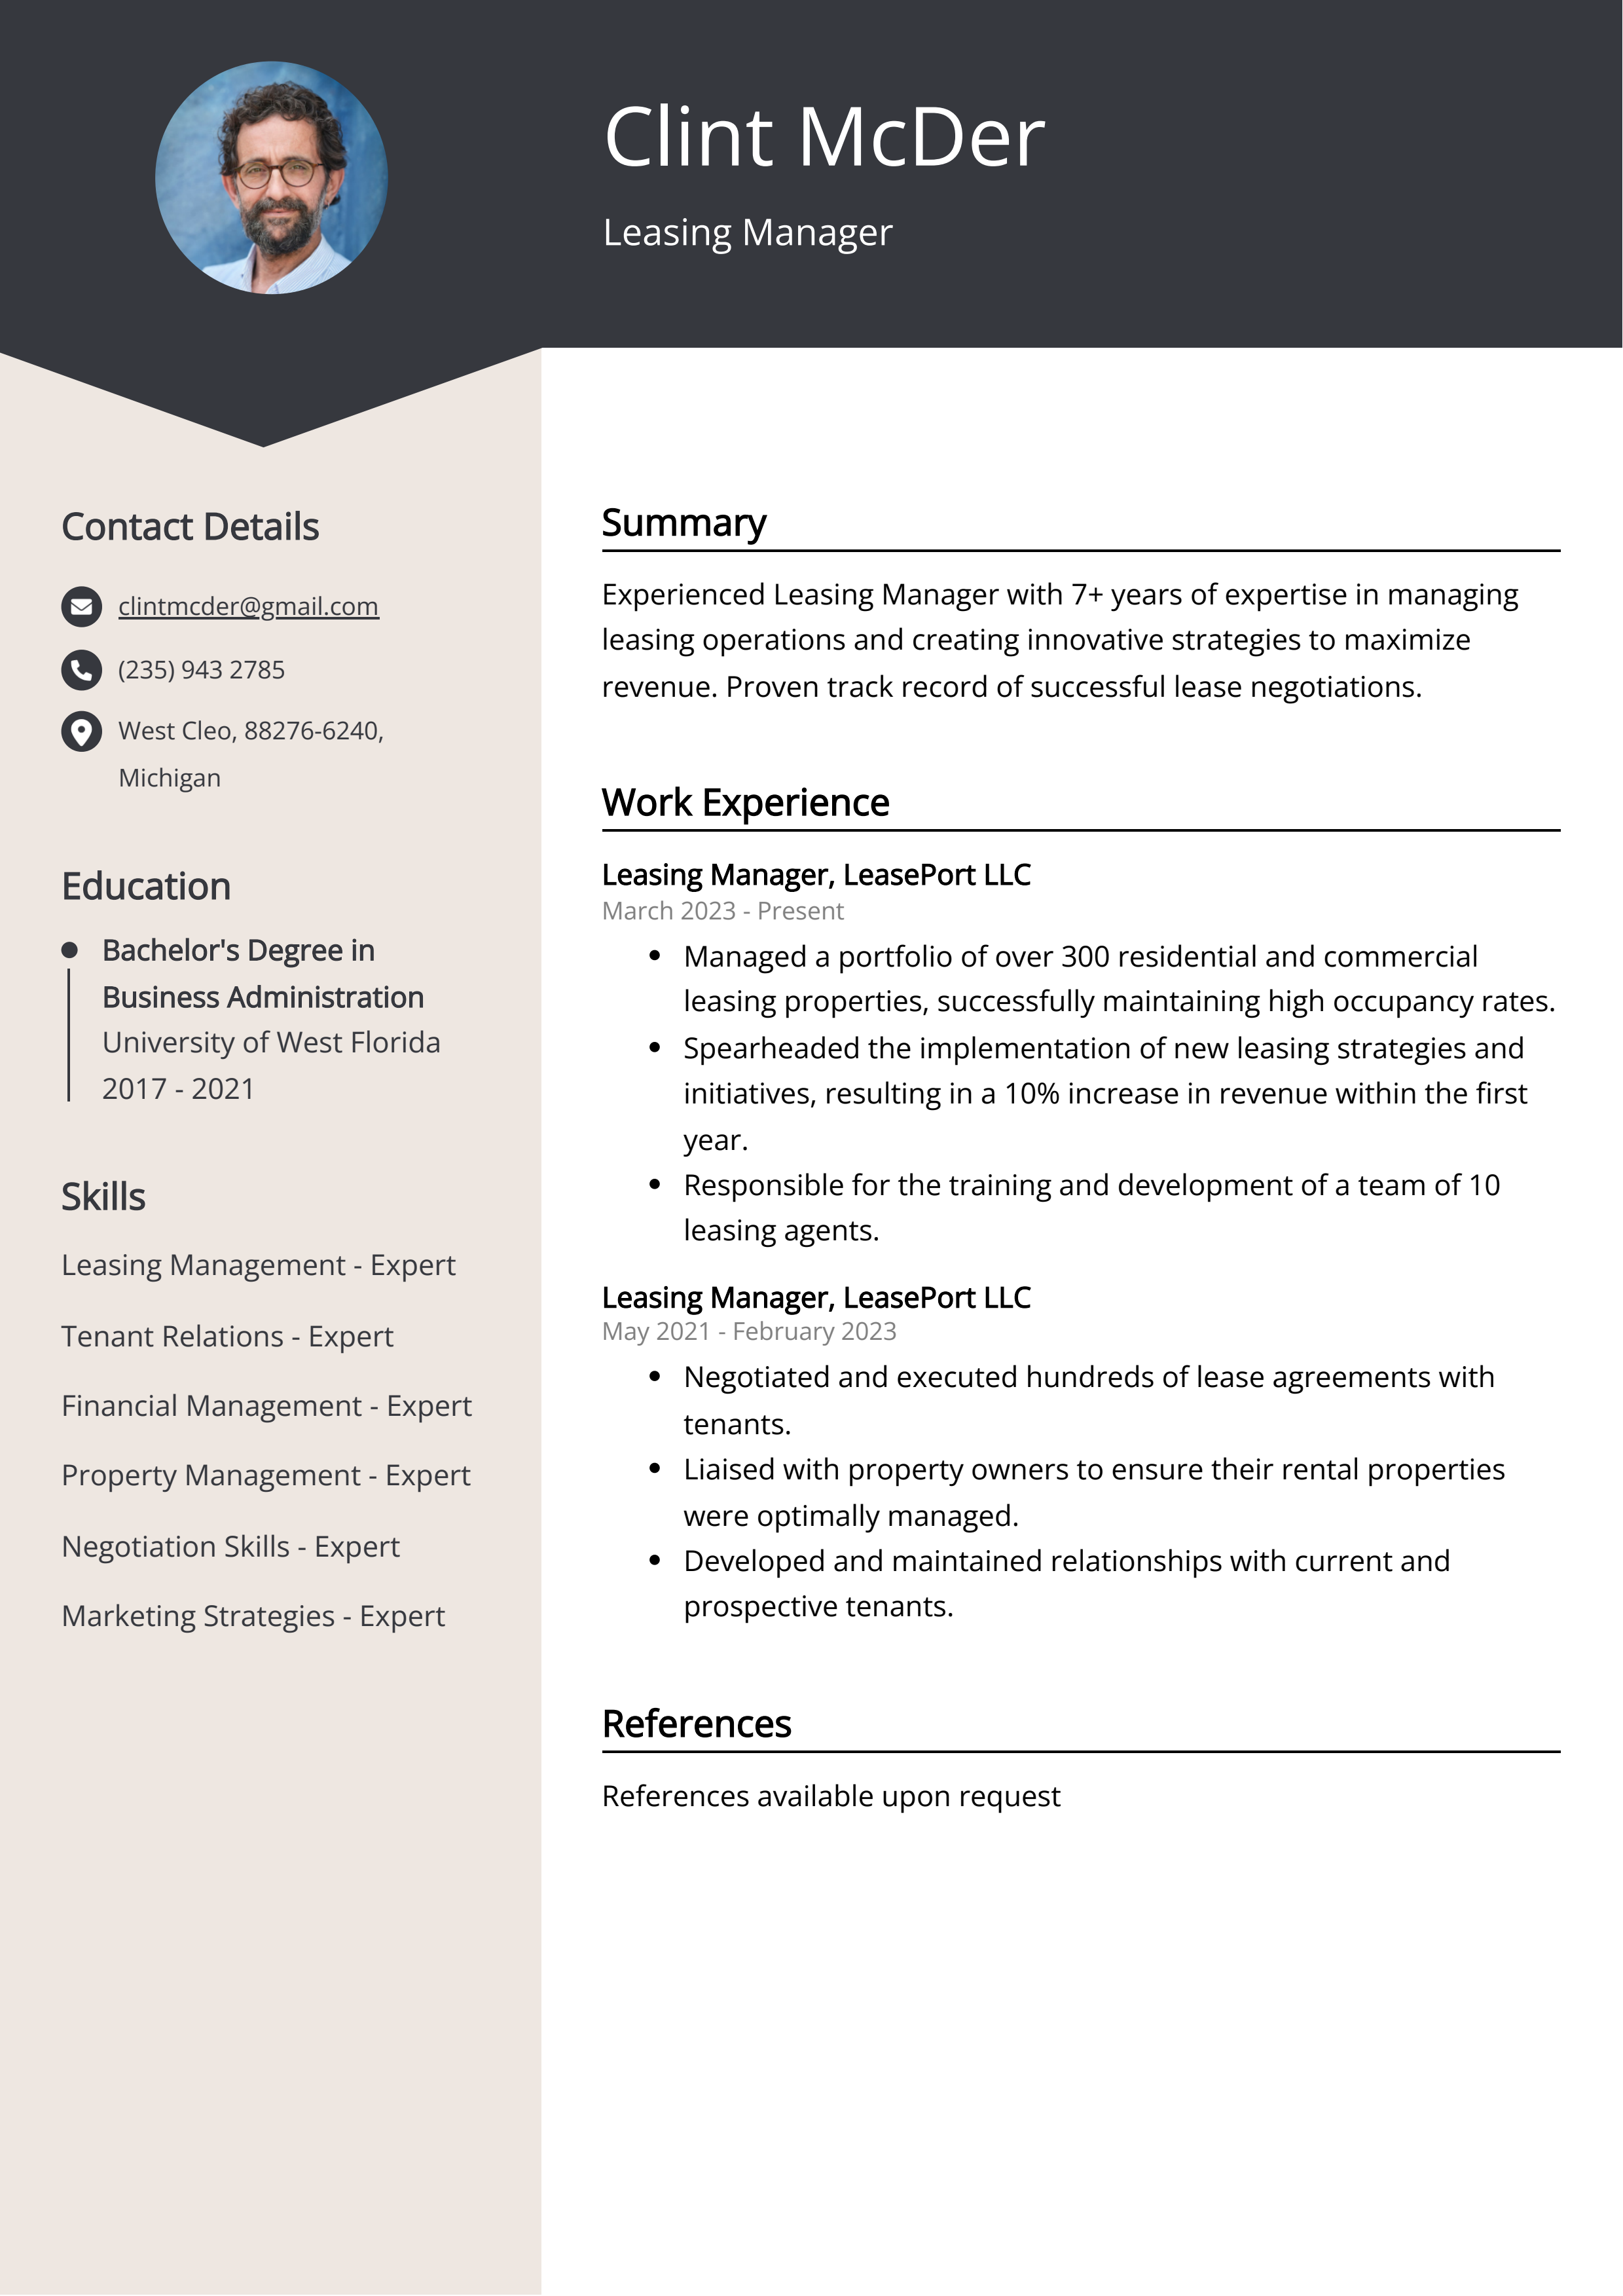 Leasing Manager CV Example